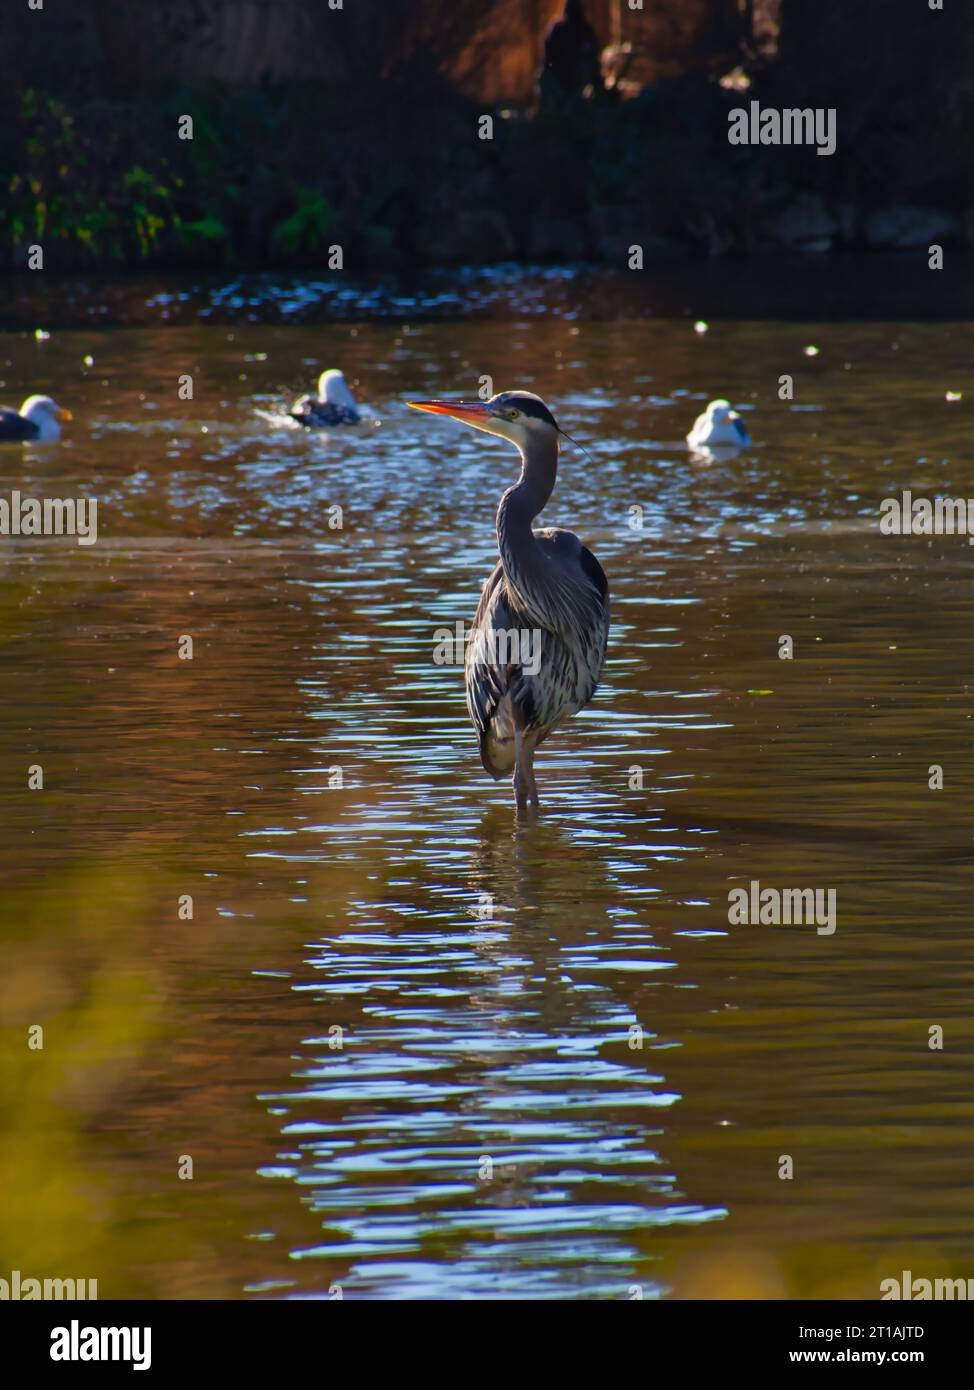 Graceful great blue heron framed against shimmering water in a manmade pond at the Palace of Fine Art in San Francisco, California. Stock Photo